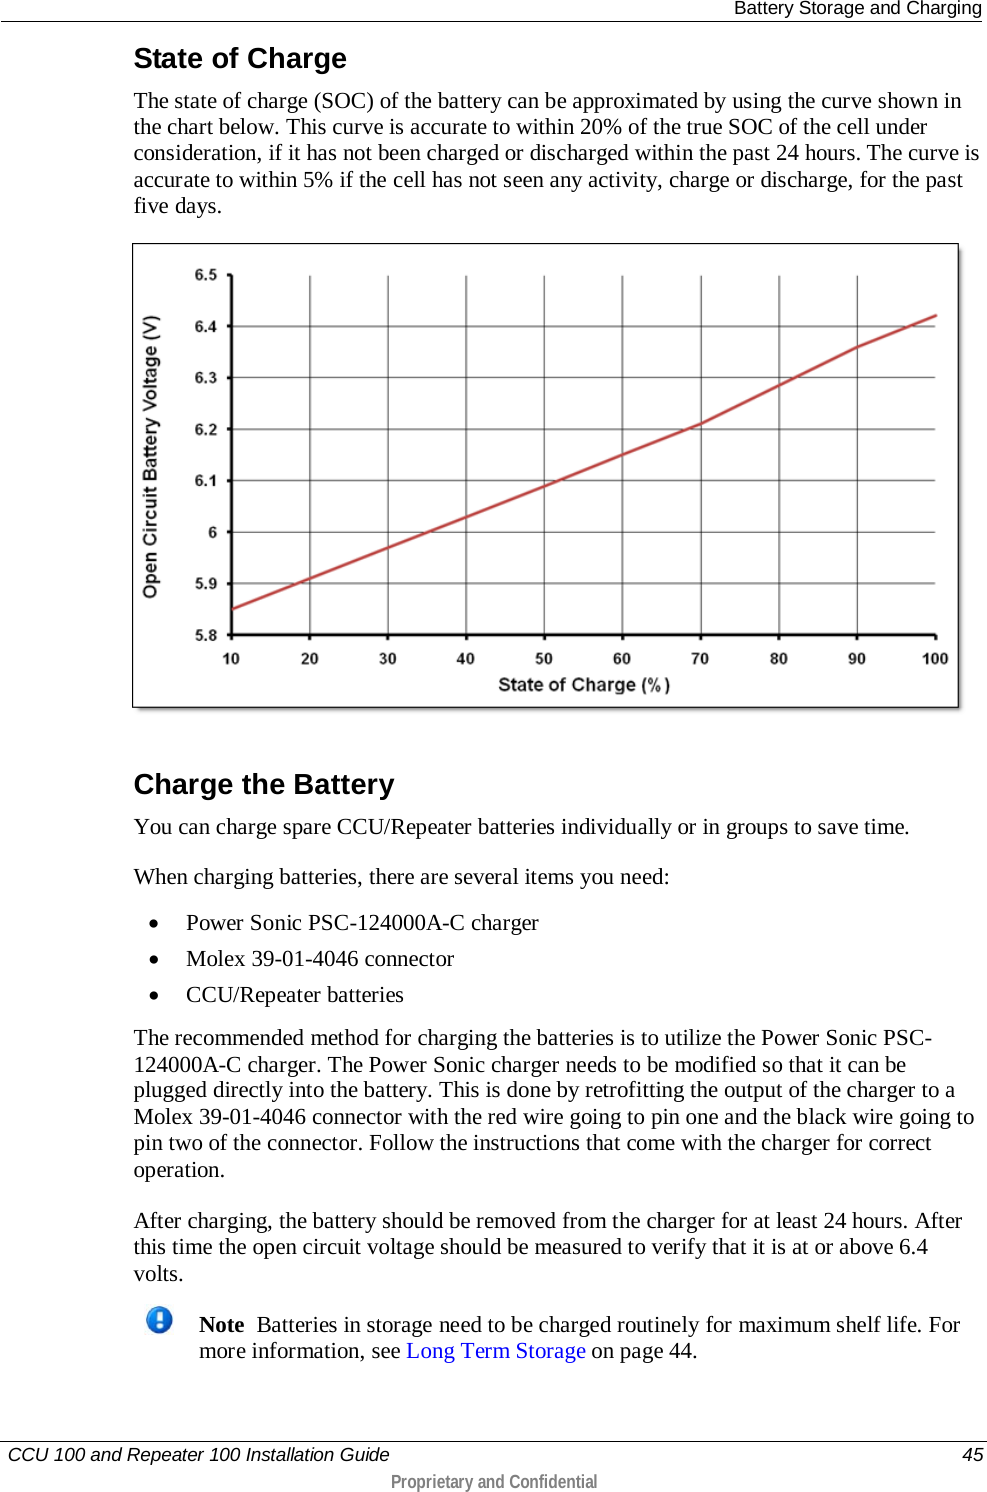  Battery Storage and Charging   CCU 100 and Repeater 100 Installation Guide    45  Proprietary and Confidential  State of Charge The state of charge (SOC) of the battery can be approximated by using the curve shown in the chart below. This curve is accurate to within 20% of the true SOC of the cell under consideration, if it has not been charged or discharged within the past 24 hours. The curve is accurate to within 5% if the cell has not seen any activity, charge or discharge, for the past five days.   Charge the Battery You can charge spare CCU/Repeater batteries individually or in groups to save time.  When charging batteries, there are several items you need:  • Power Sonic PSC-124000A-C charger • Molex 39-01-4046 connector • CCU/Repeater batteries The recommended method for charging the batteries is to utilize the Power Sonic PSC-124000A-C charger. The Power Sonic charger needs to be modified so that it can be plugged directly into the battery. This is done by retrofitting the output of the charger to a Molex 39-01-4046 connector with the red wire going to pin one and the black wire going to pin two of the connector. Follow the instructions that come with the charger for correct operation. After charging, the battery should be removed from the charger for at least 24 hours. After this time the open circuit voltage should be measured to verify that it is at or above 6.4 volts.   Note  Batteries in storage need to be charged routinely for maximum shelf life. For more information, see Long Term Storage on page 44.    